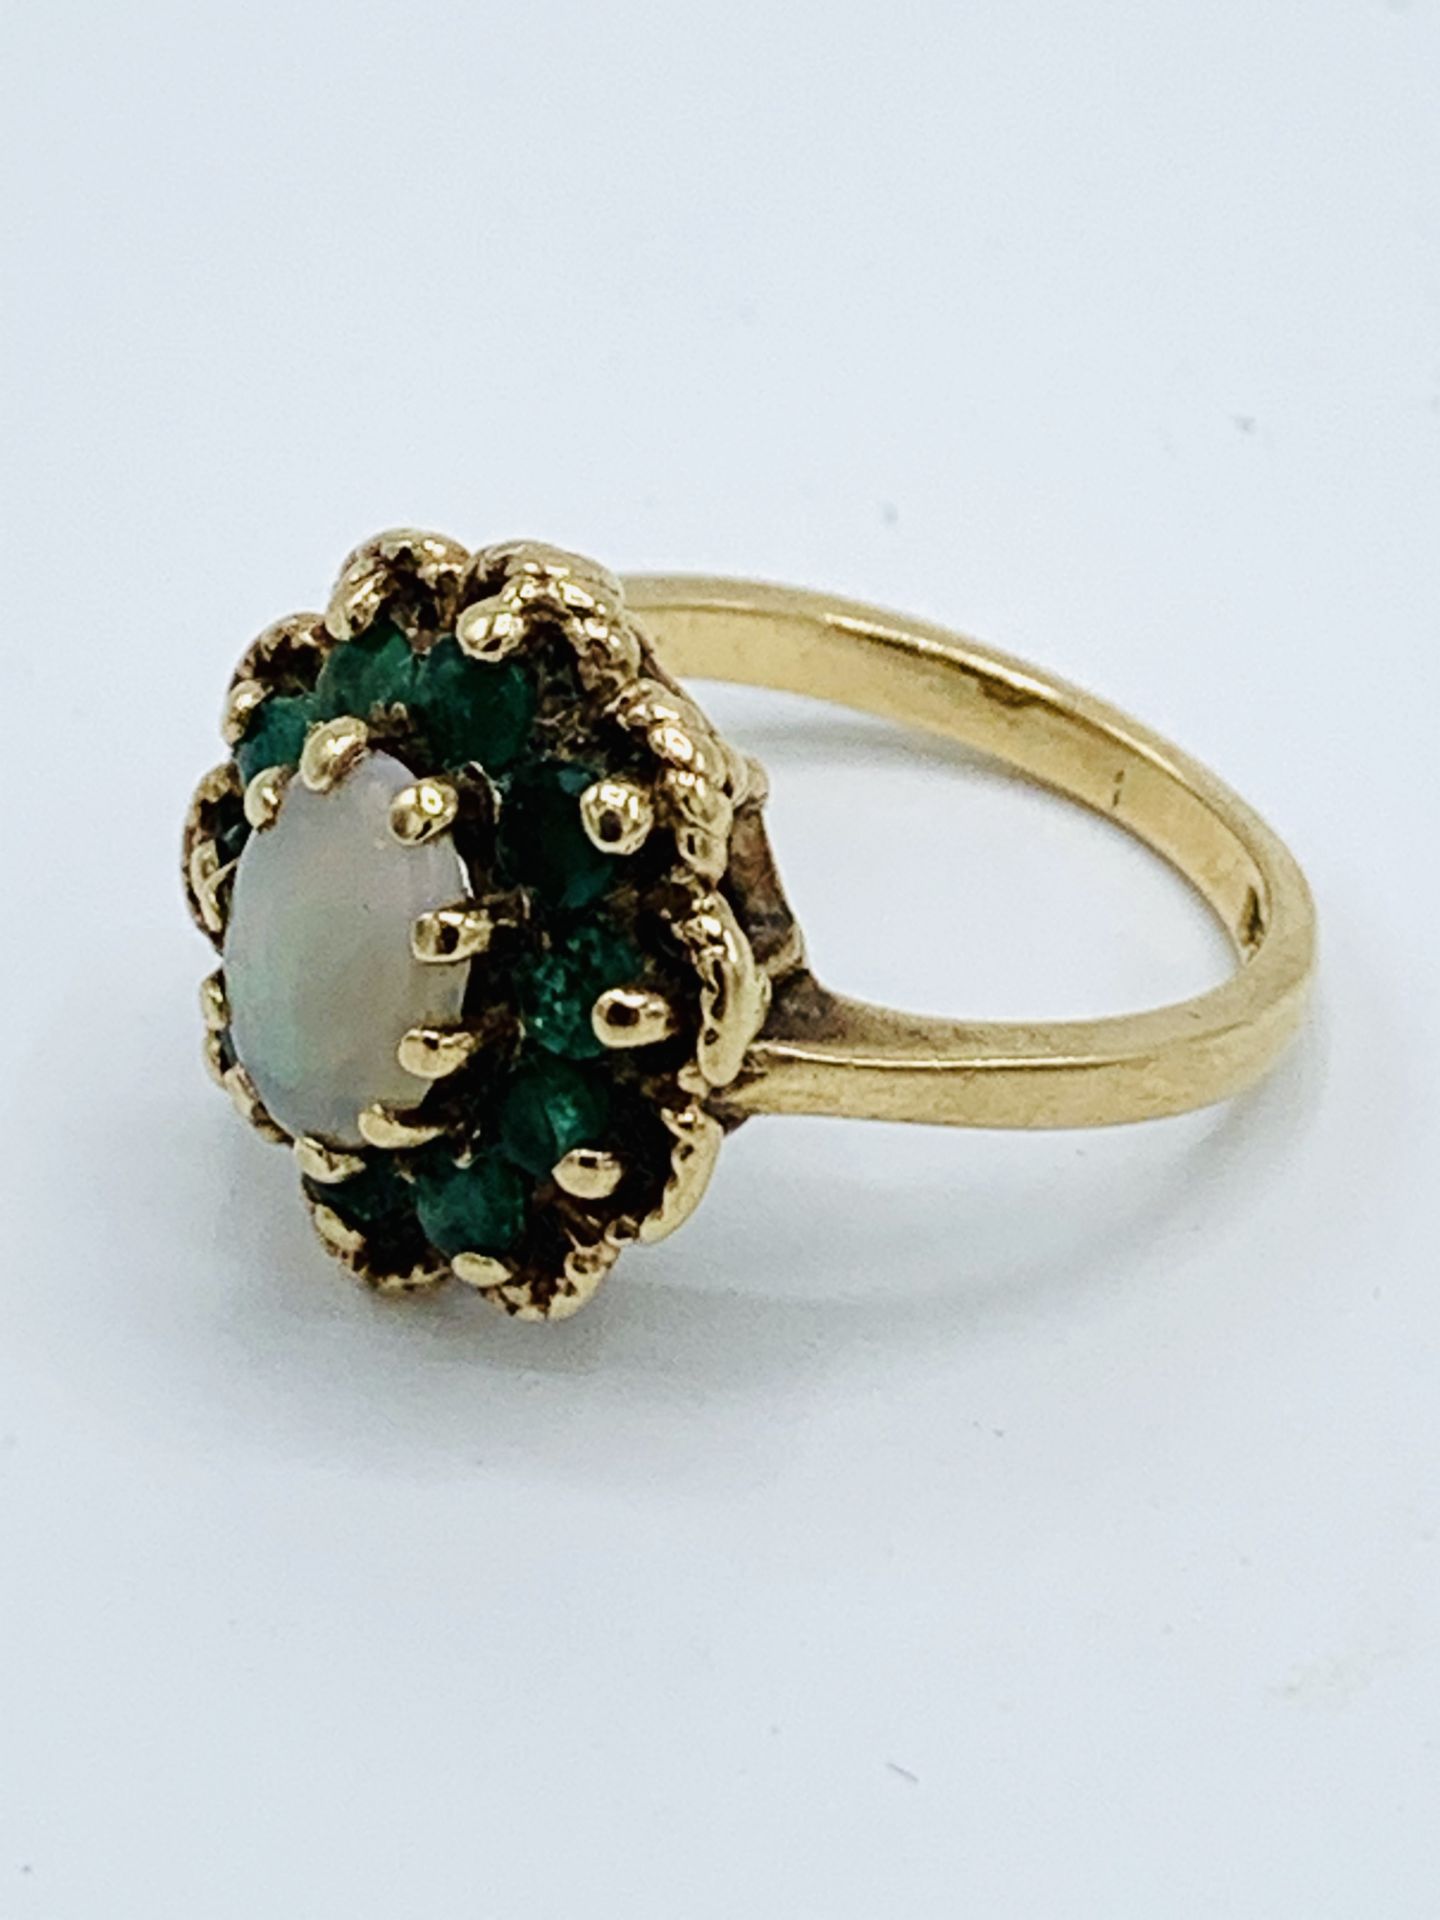 9ct gold, opal and pale green stone ring, 4.5gms - Image 2 of 5